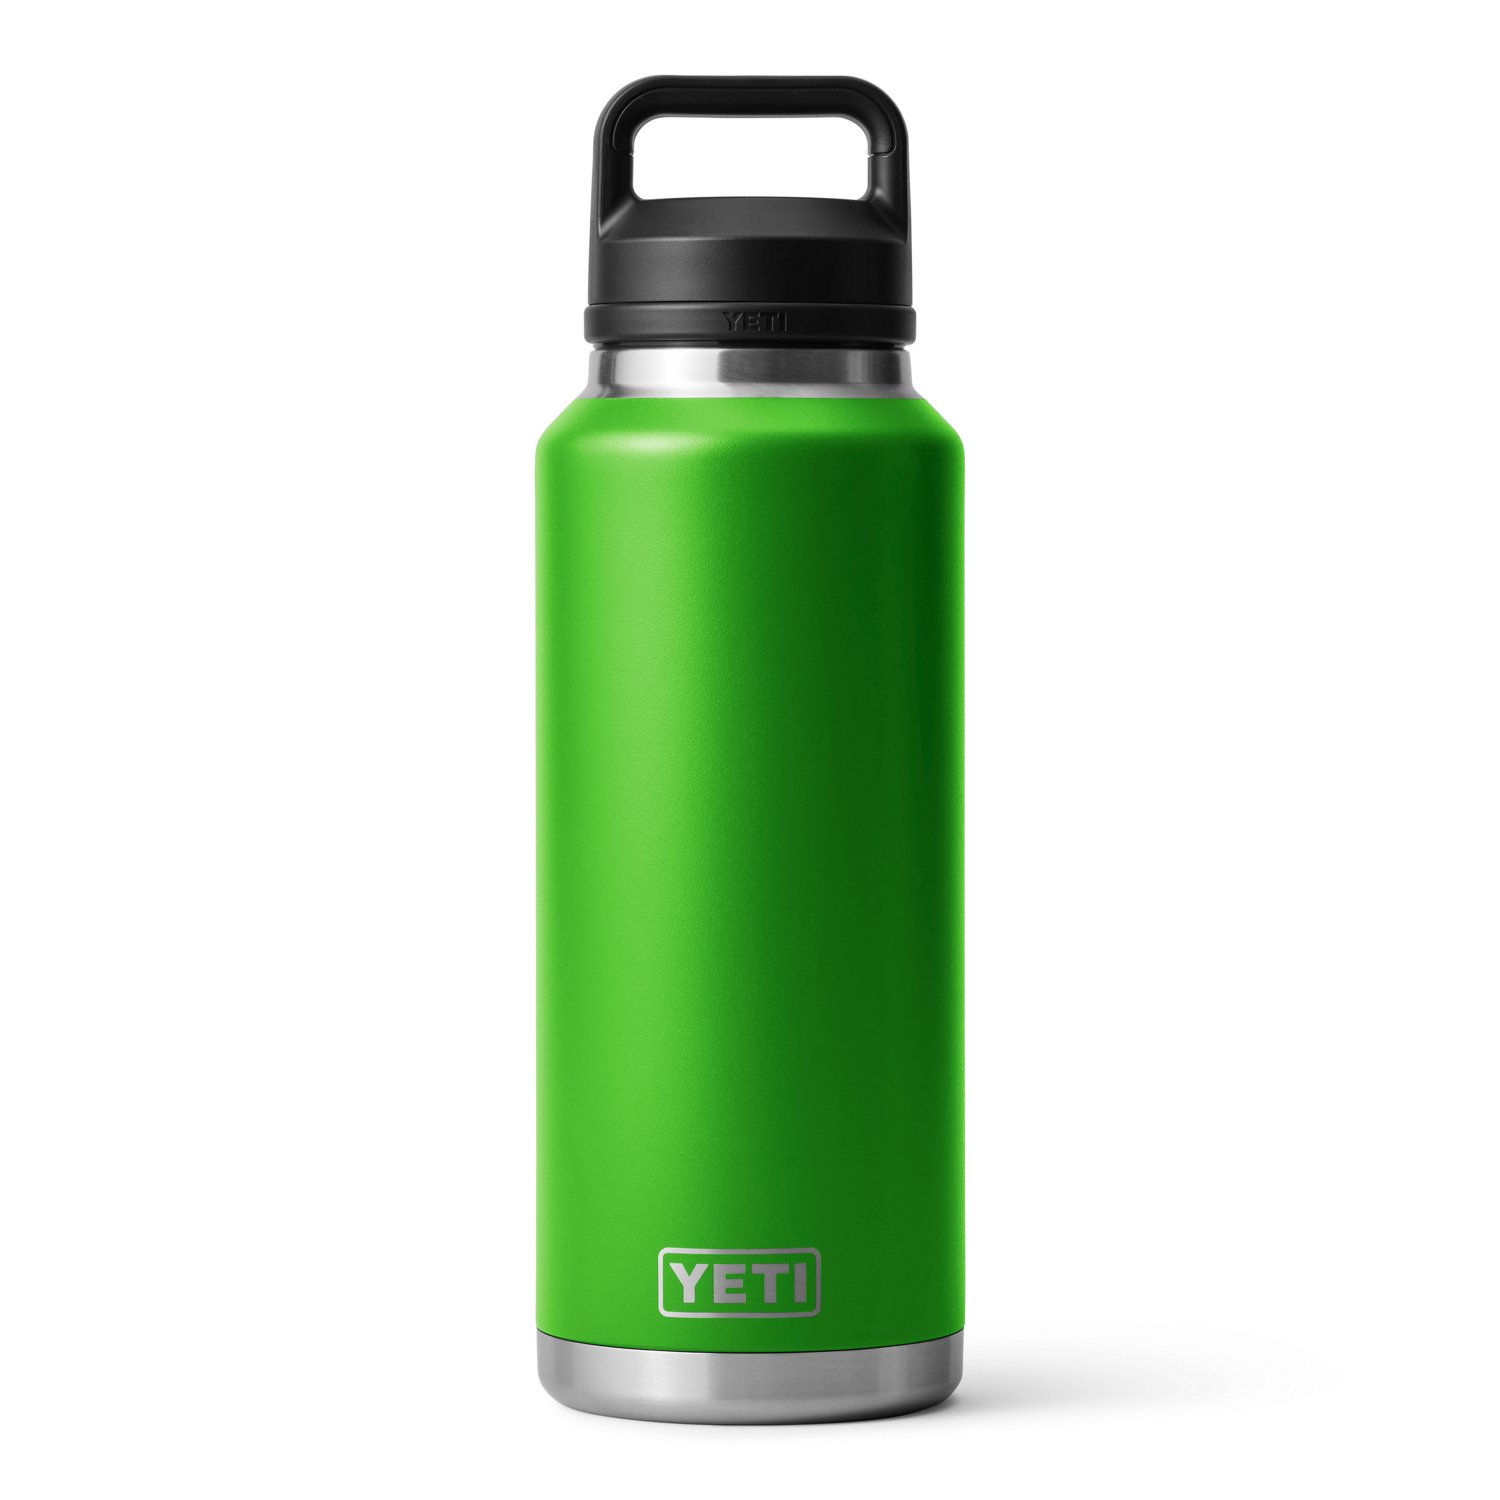 https://academy.scene7.com/is/image/academy//drinkware/yeti-rambler-46-oz-bottle-with-chug-cap-21071501450-green/5c6b121472f34a0b85ad98fa2784ef1d?$pdp-mobile-gallery-ng$